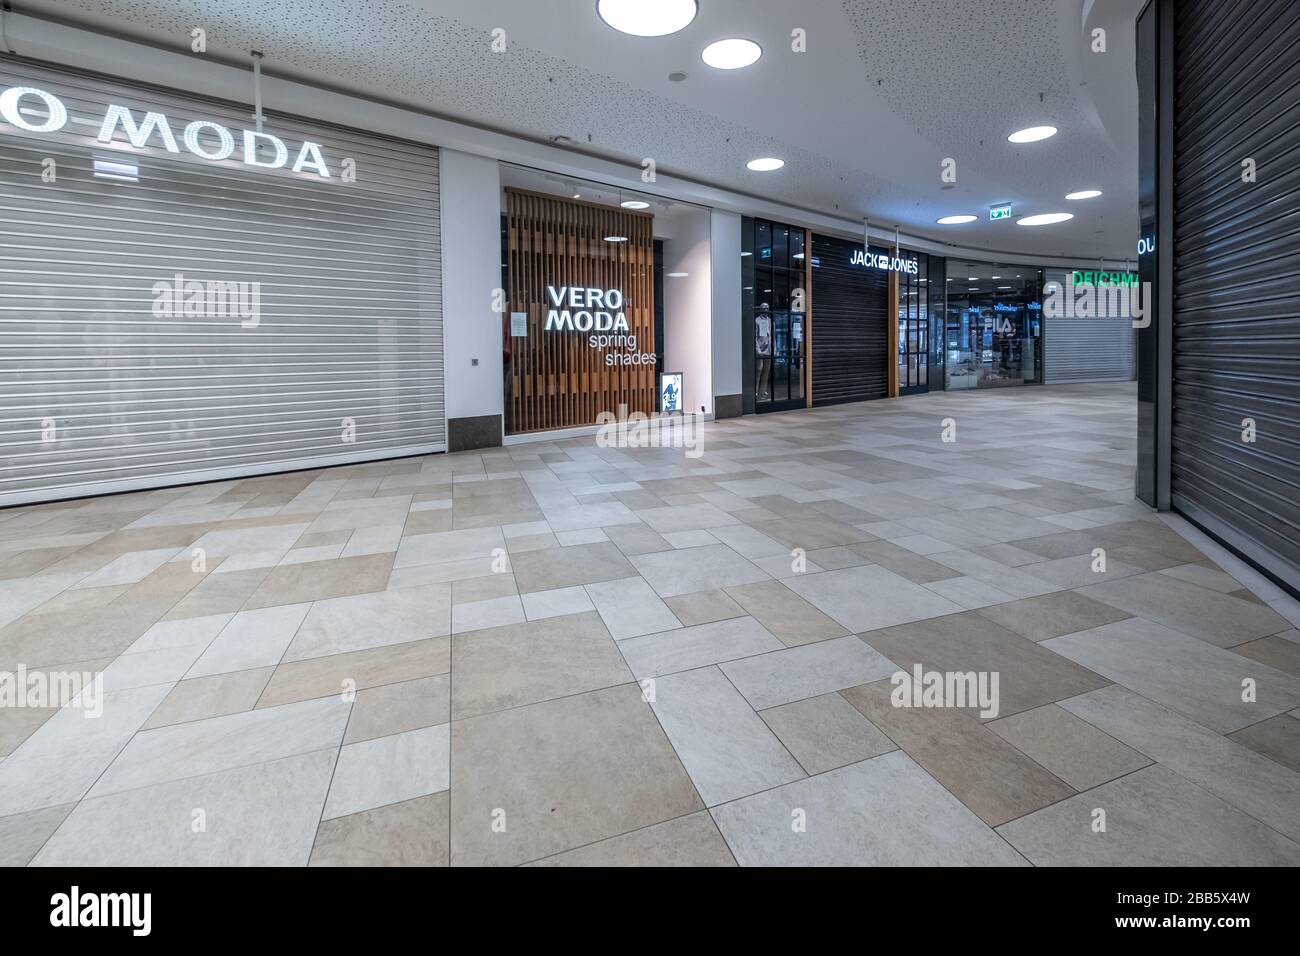 Deutschland. 30th Mar, 2020. Symbolic shops in the shopping center, Vero Moda, Jack Jones GES/Daily life in (Rastatt) during the corona crisis, 30.03.2020 GES/Daily life during the corona crisis in Rastatt,